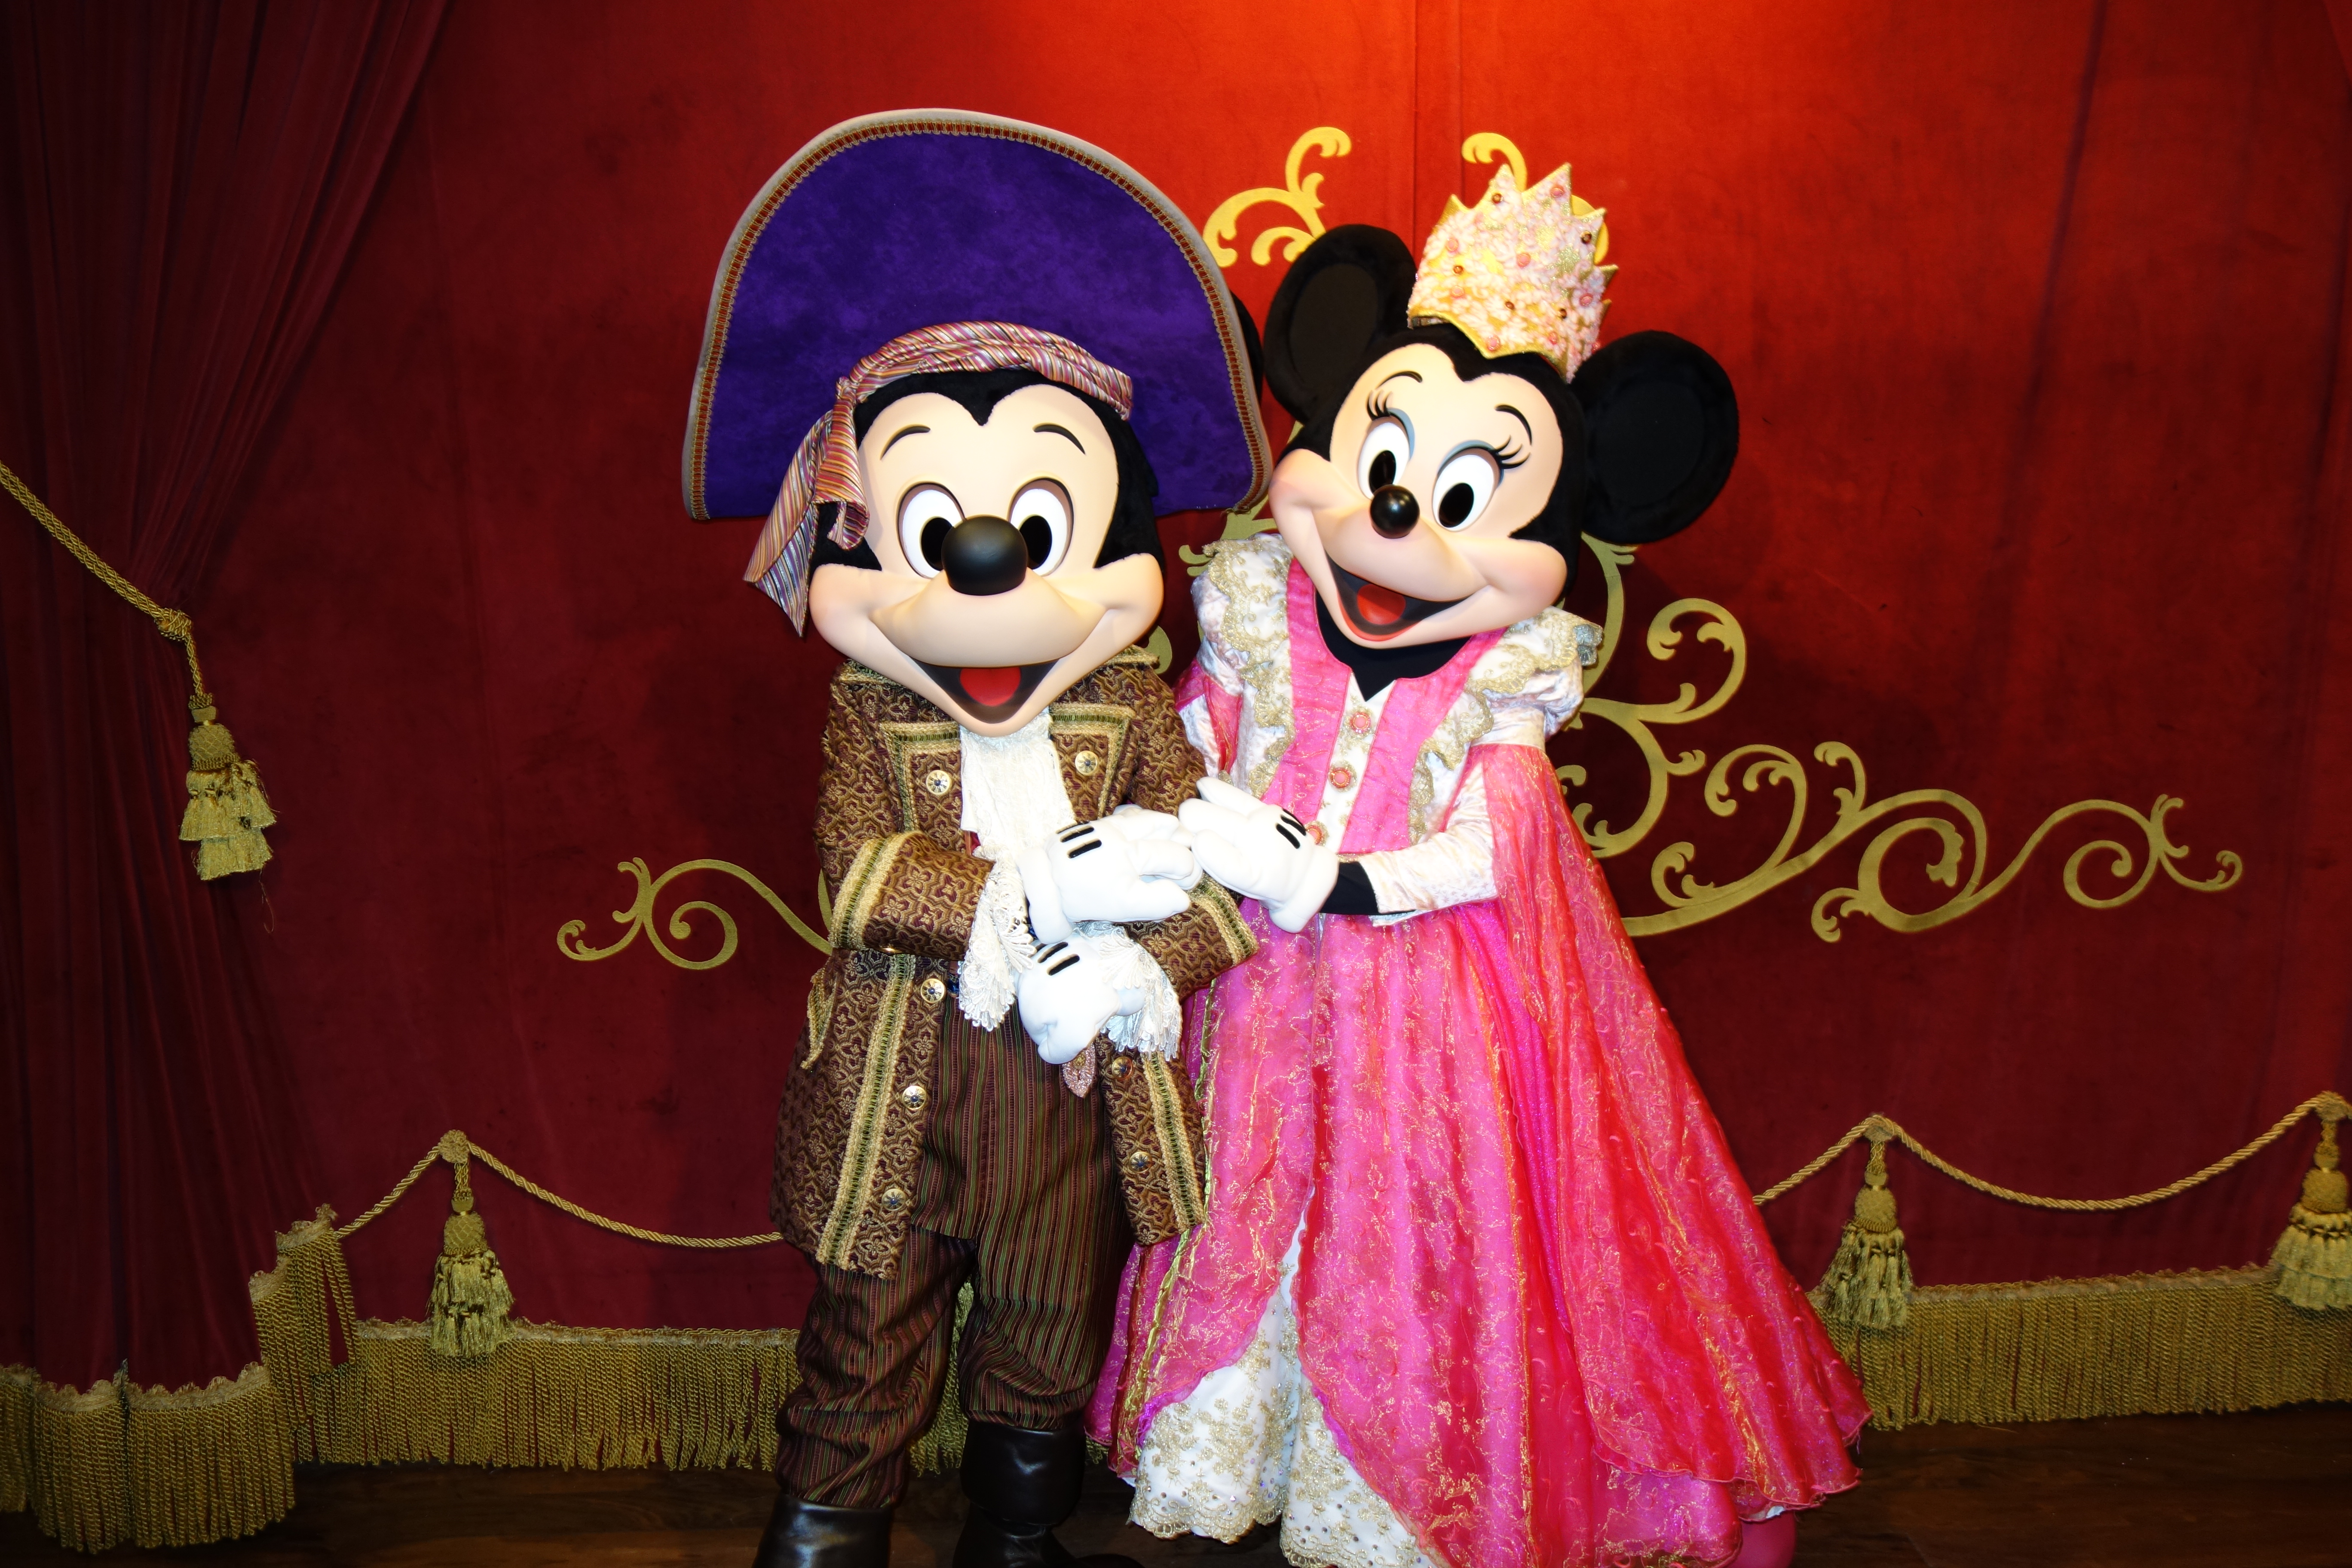 Mickey as Pirate and Minnie as Princess at Mickey's Not So Scary Halloween Party - September 2012